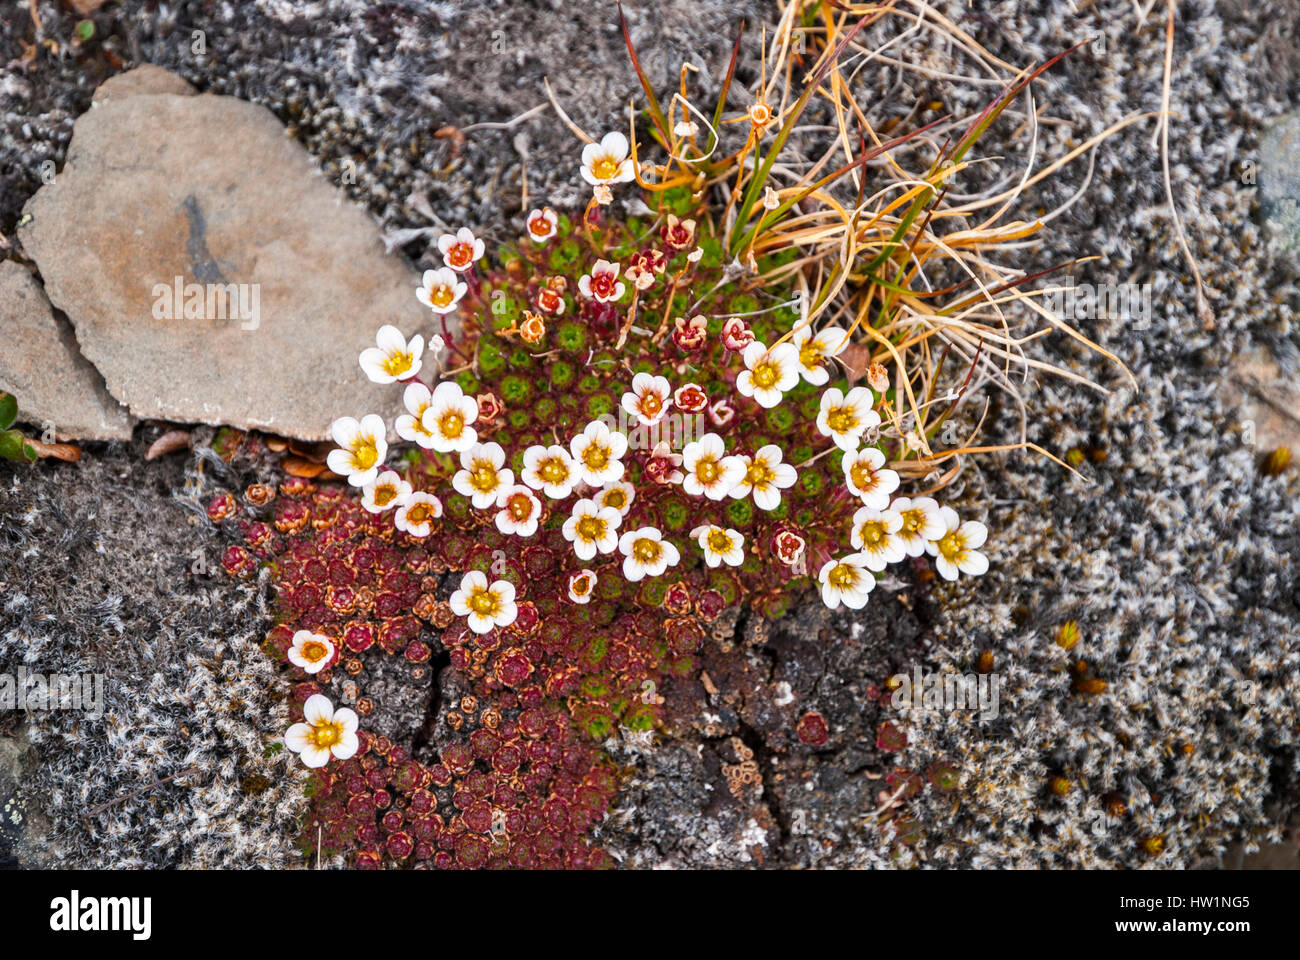 Tufted saxifrage blossoming, Svalbard, Norway Stock Photo